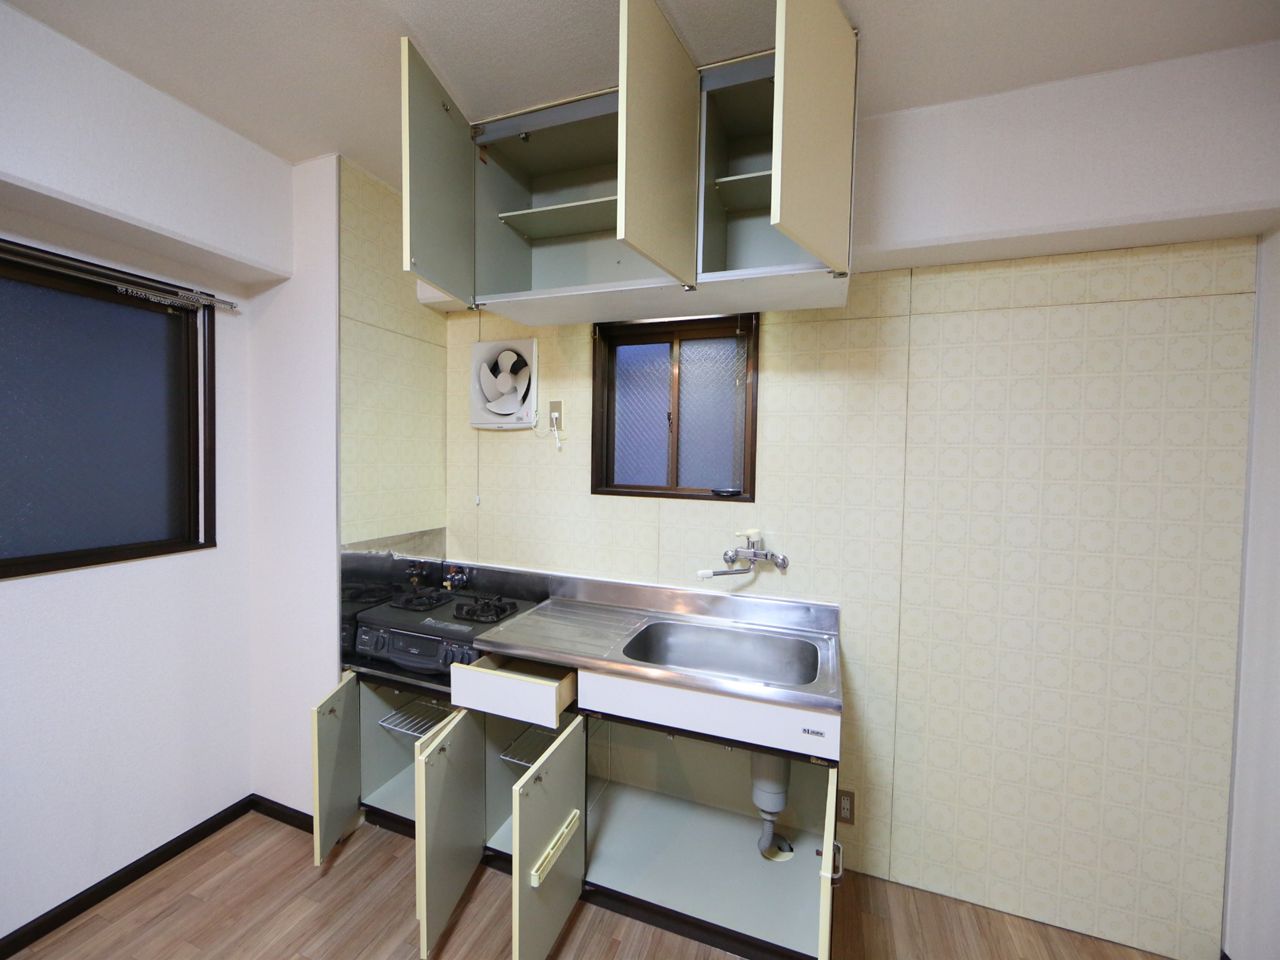 Kitchen. Kitchen (two-burner gas stove installation Allowed) Refrigerator ・ Microwave oven, etc. available OK